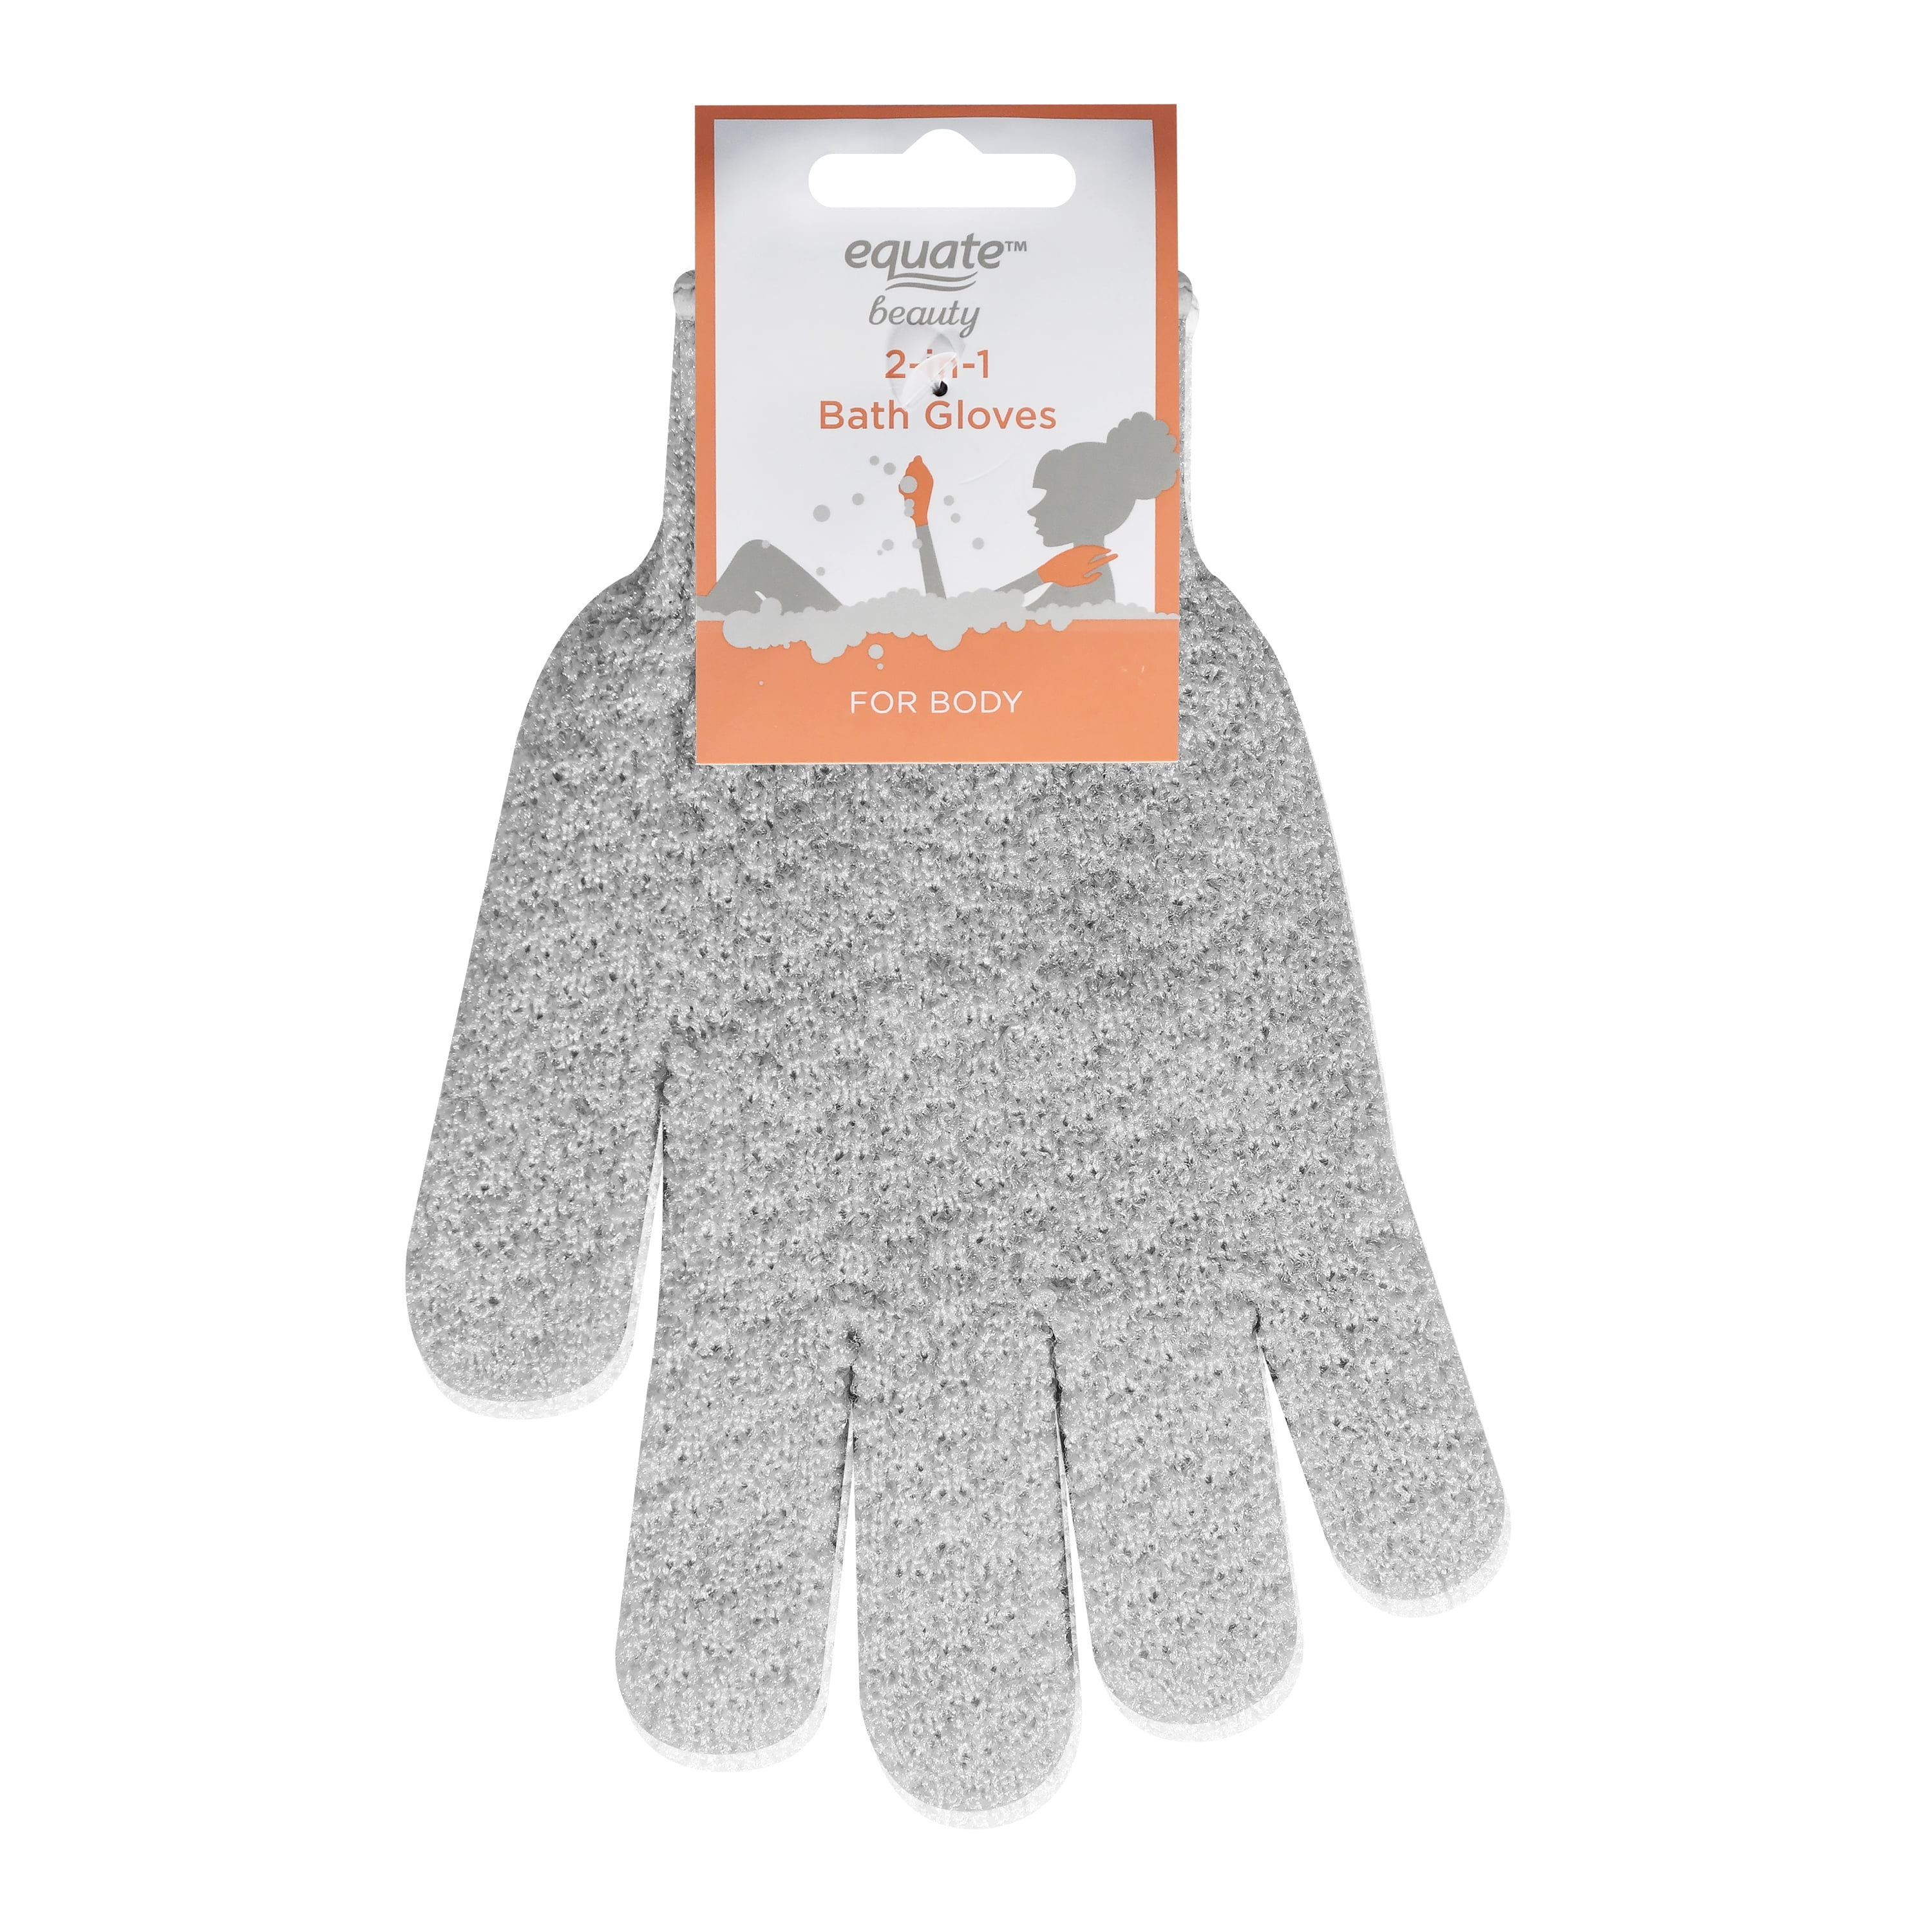 Equate Beauty 2-in-1 Bath Gloves for Body, Cleansing and Exfoliating, Color May Vary, 2 Count